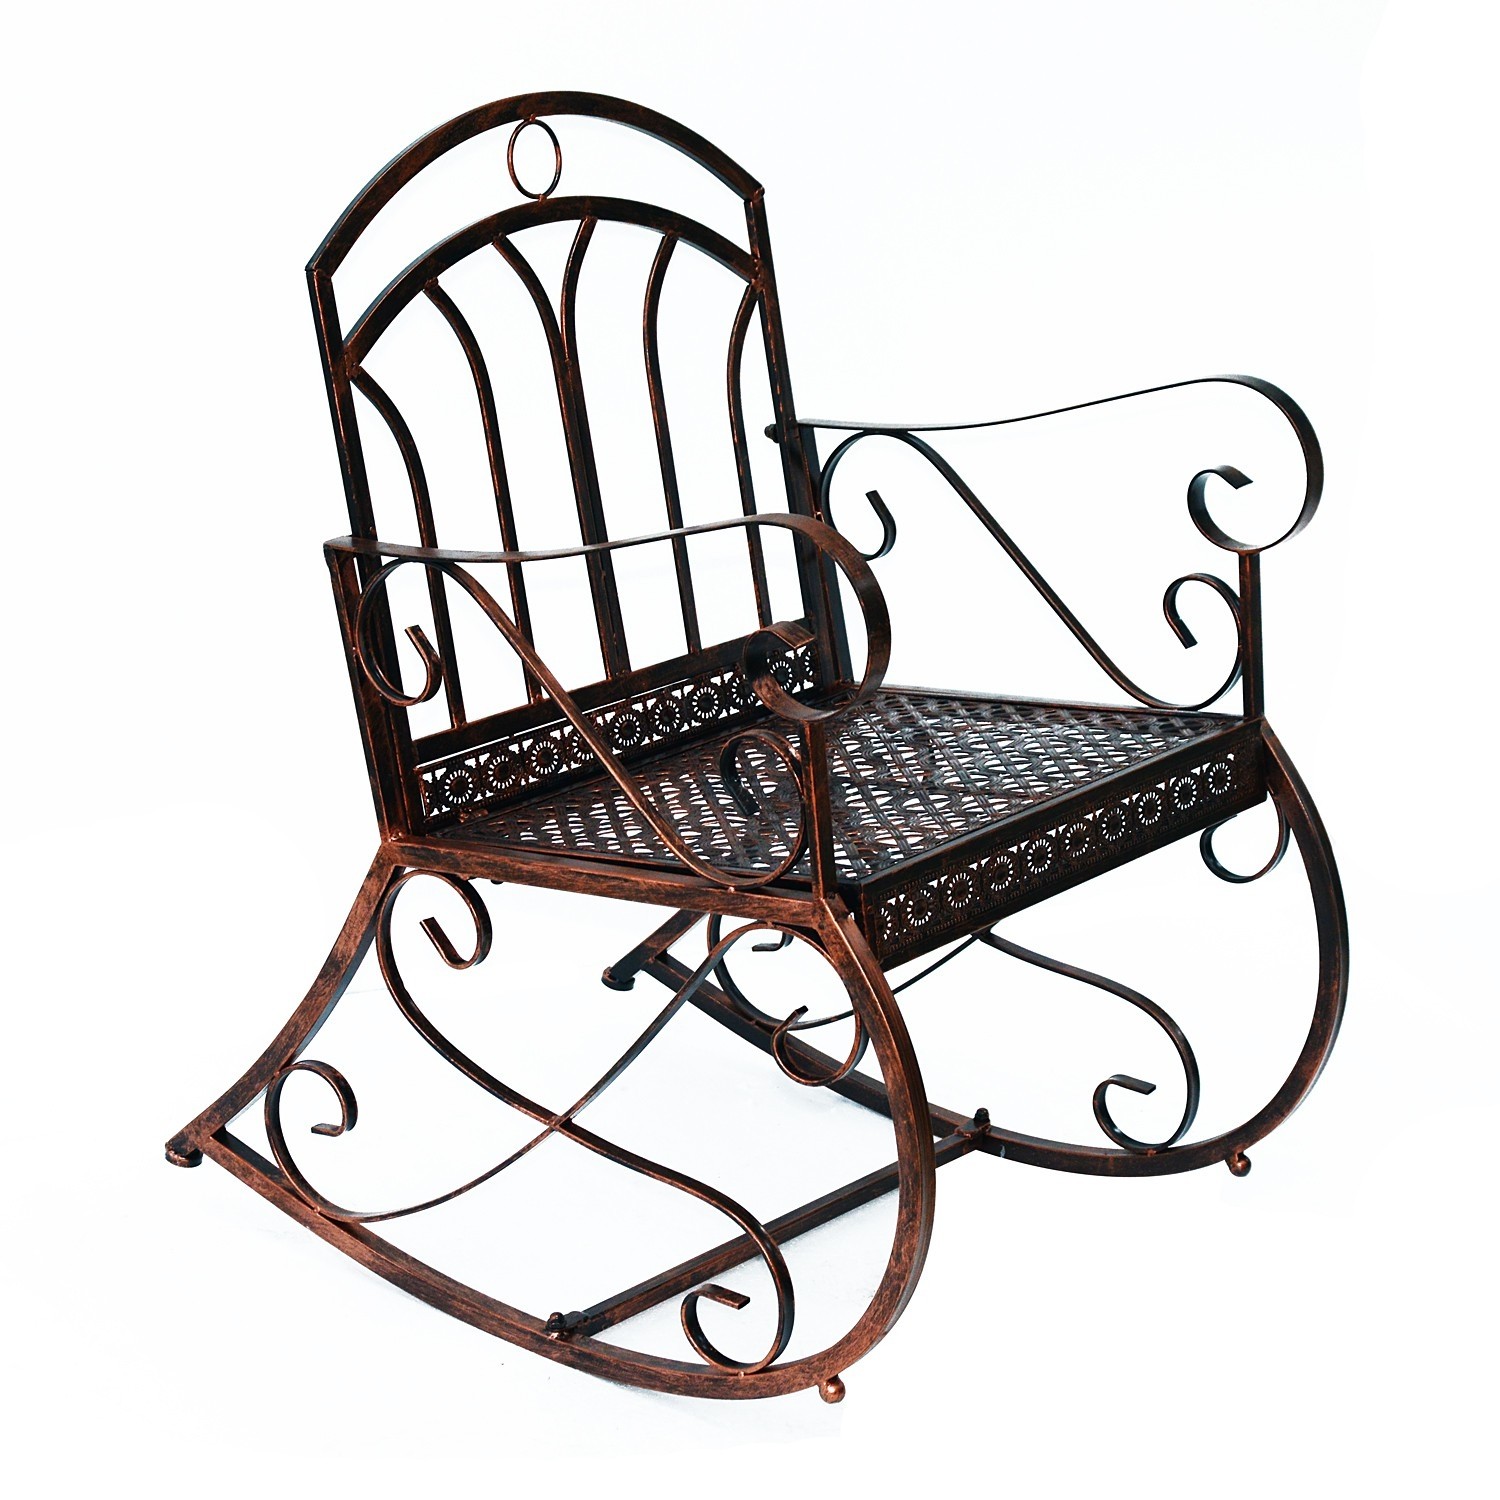 Outsunny luxury metal garden chair patio swing lounger